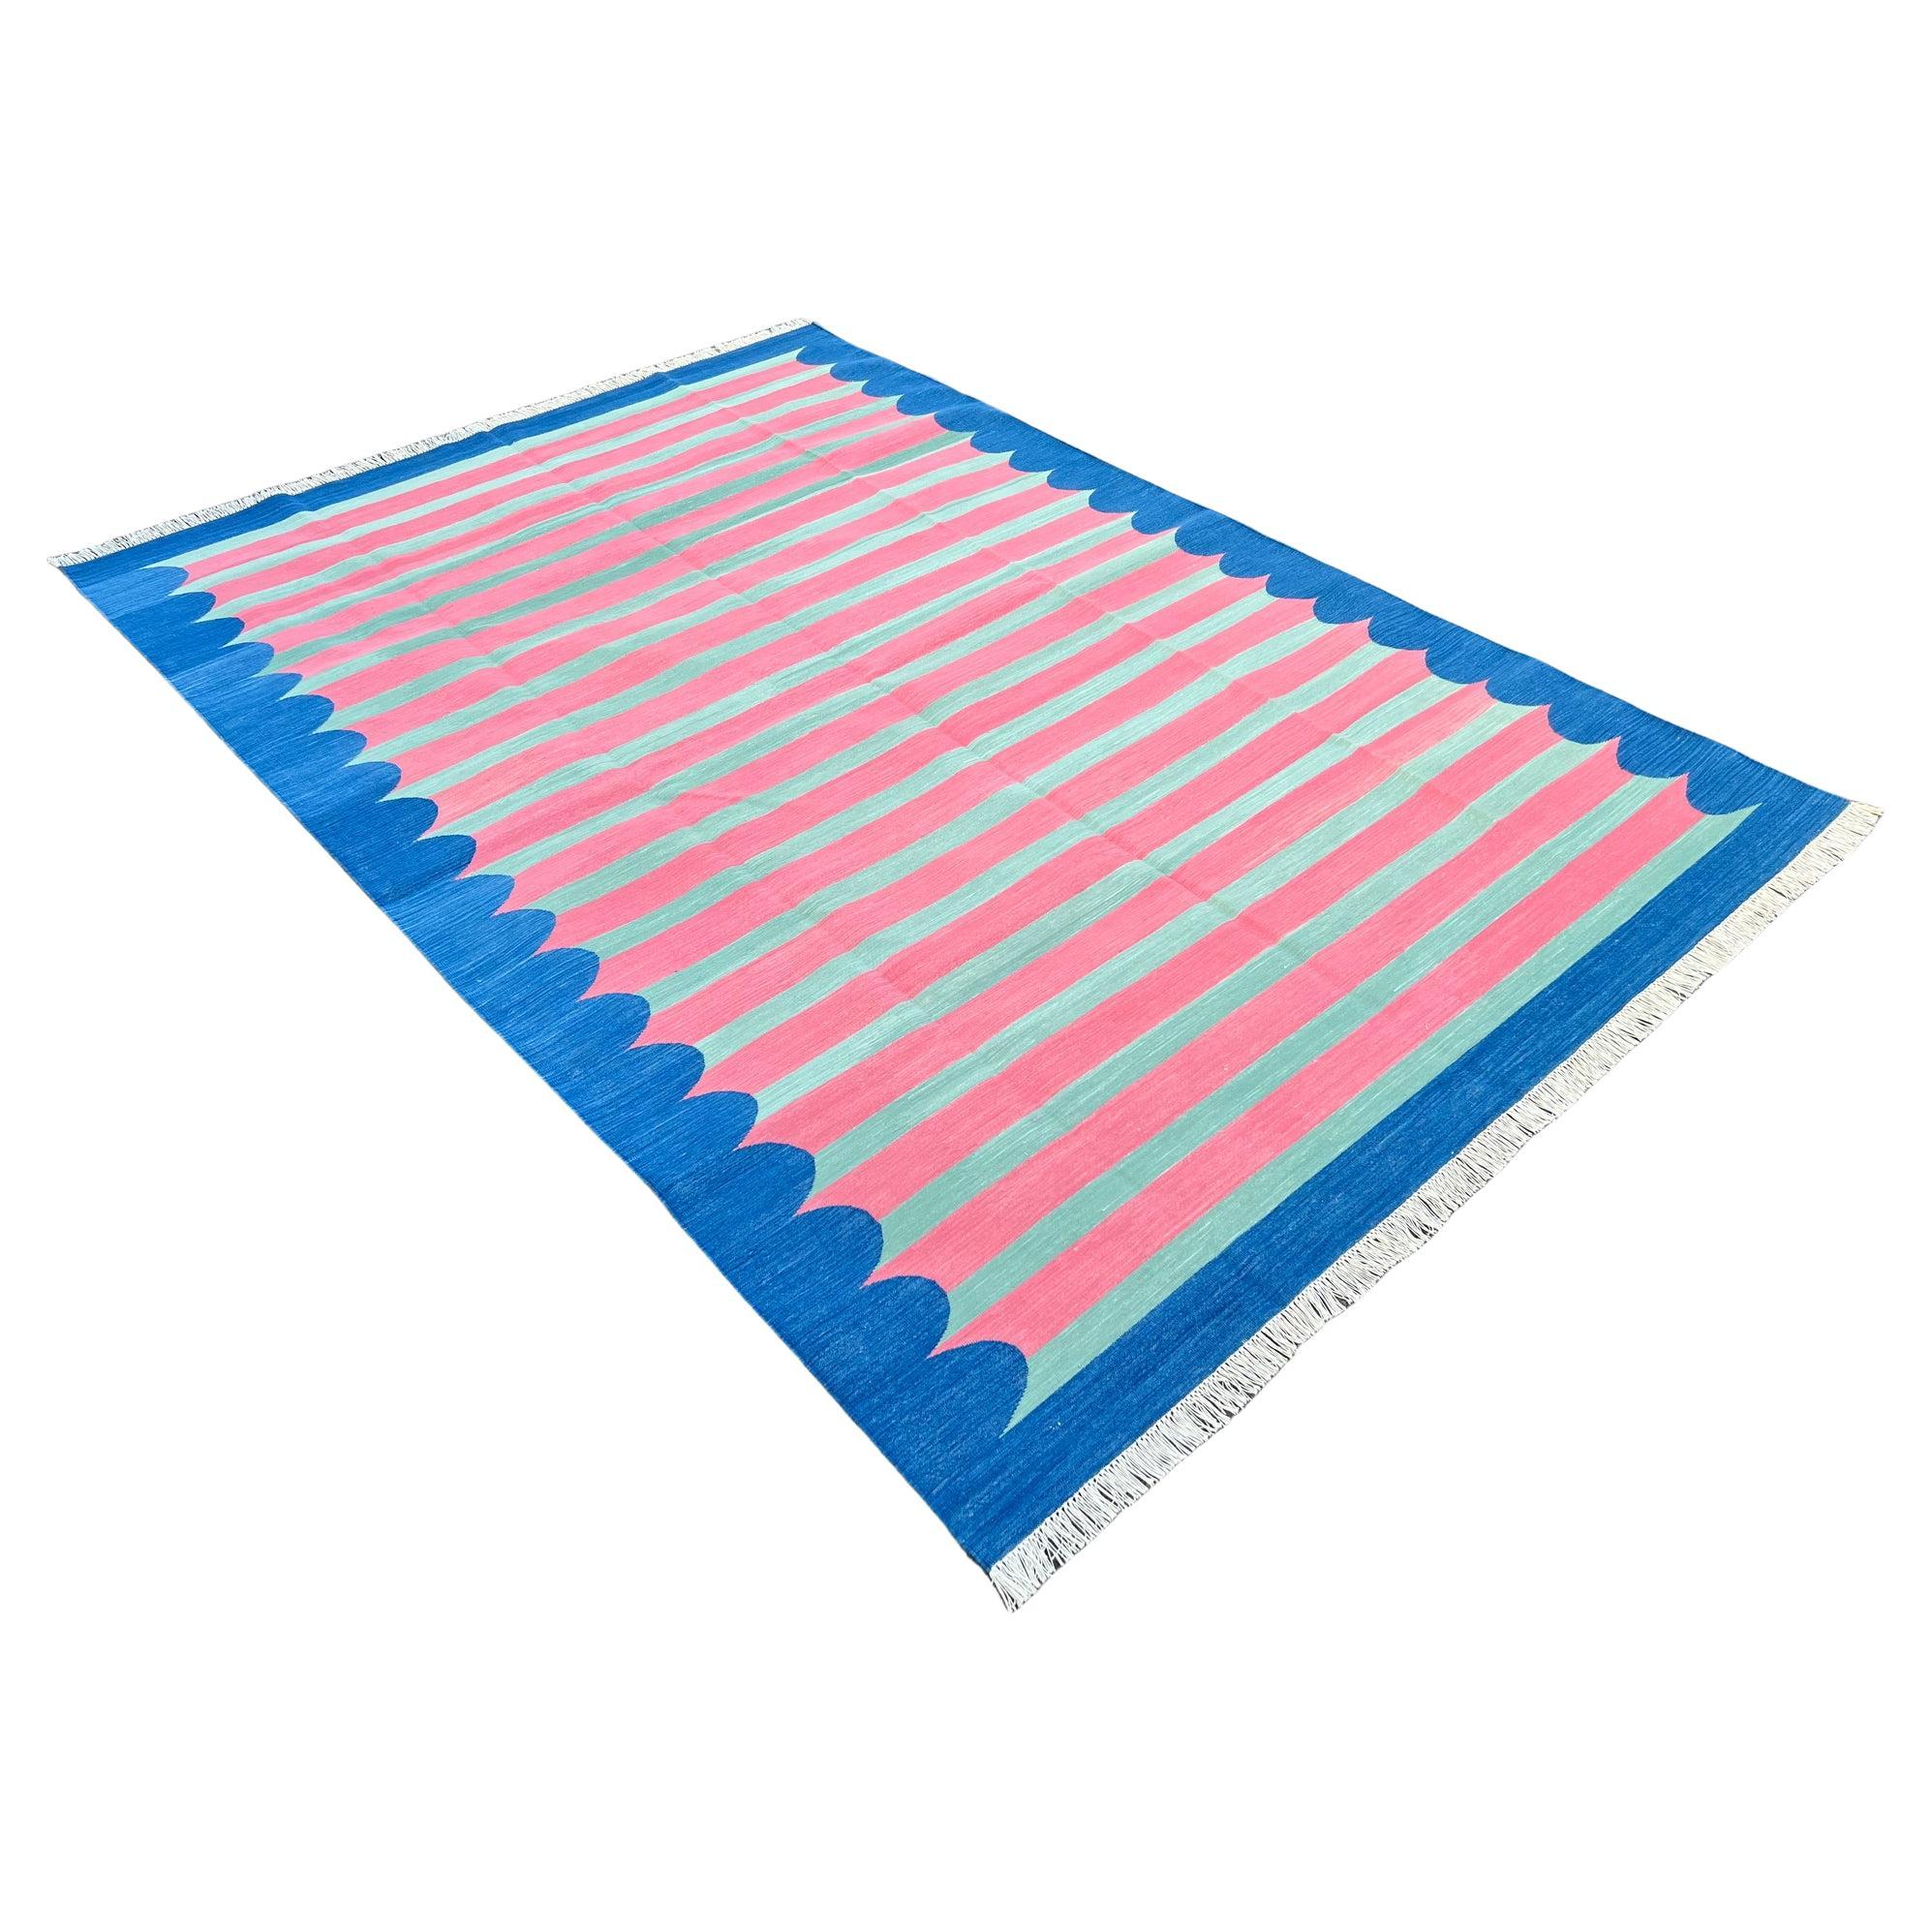 Handmade Cotton Area Flat Weave Rug, Pink And Blue Scalloped Striped Dhurrie Rug For Sale